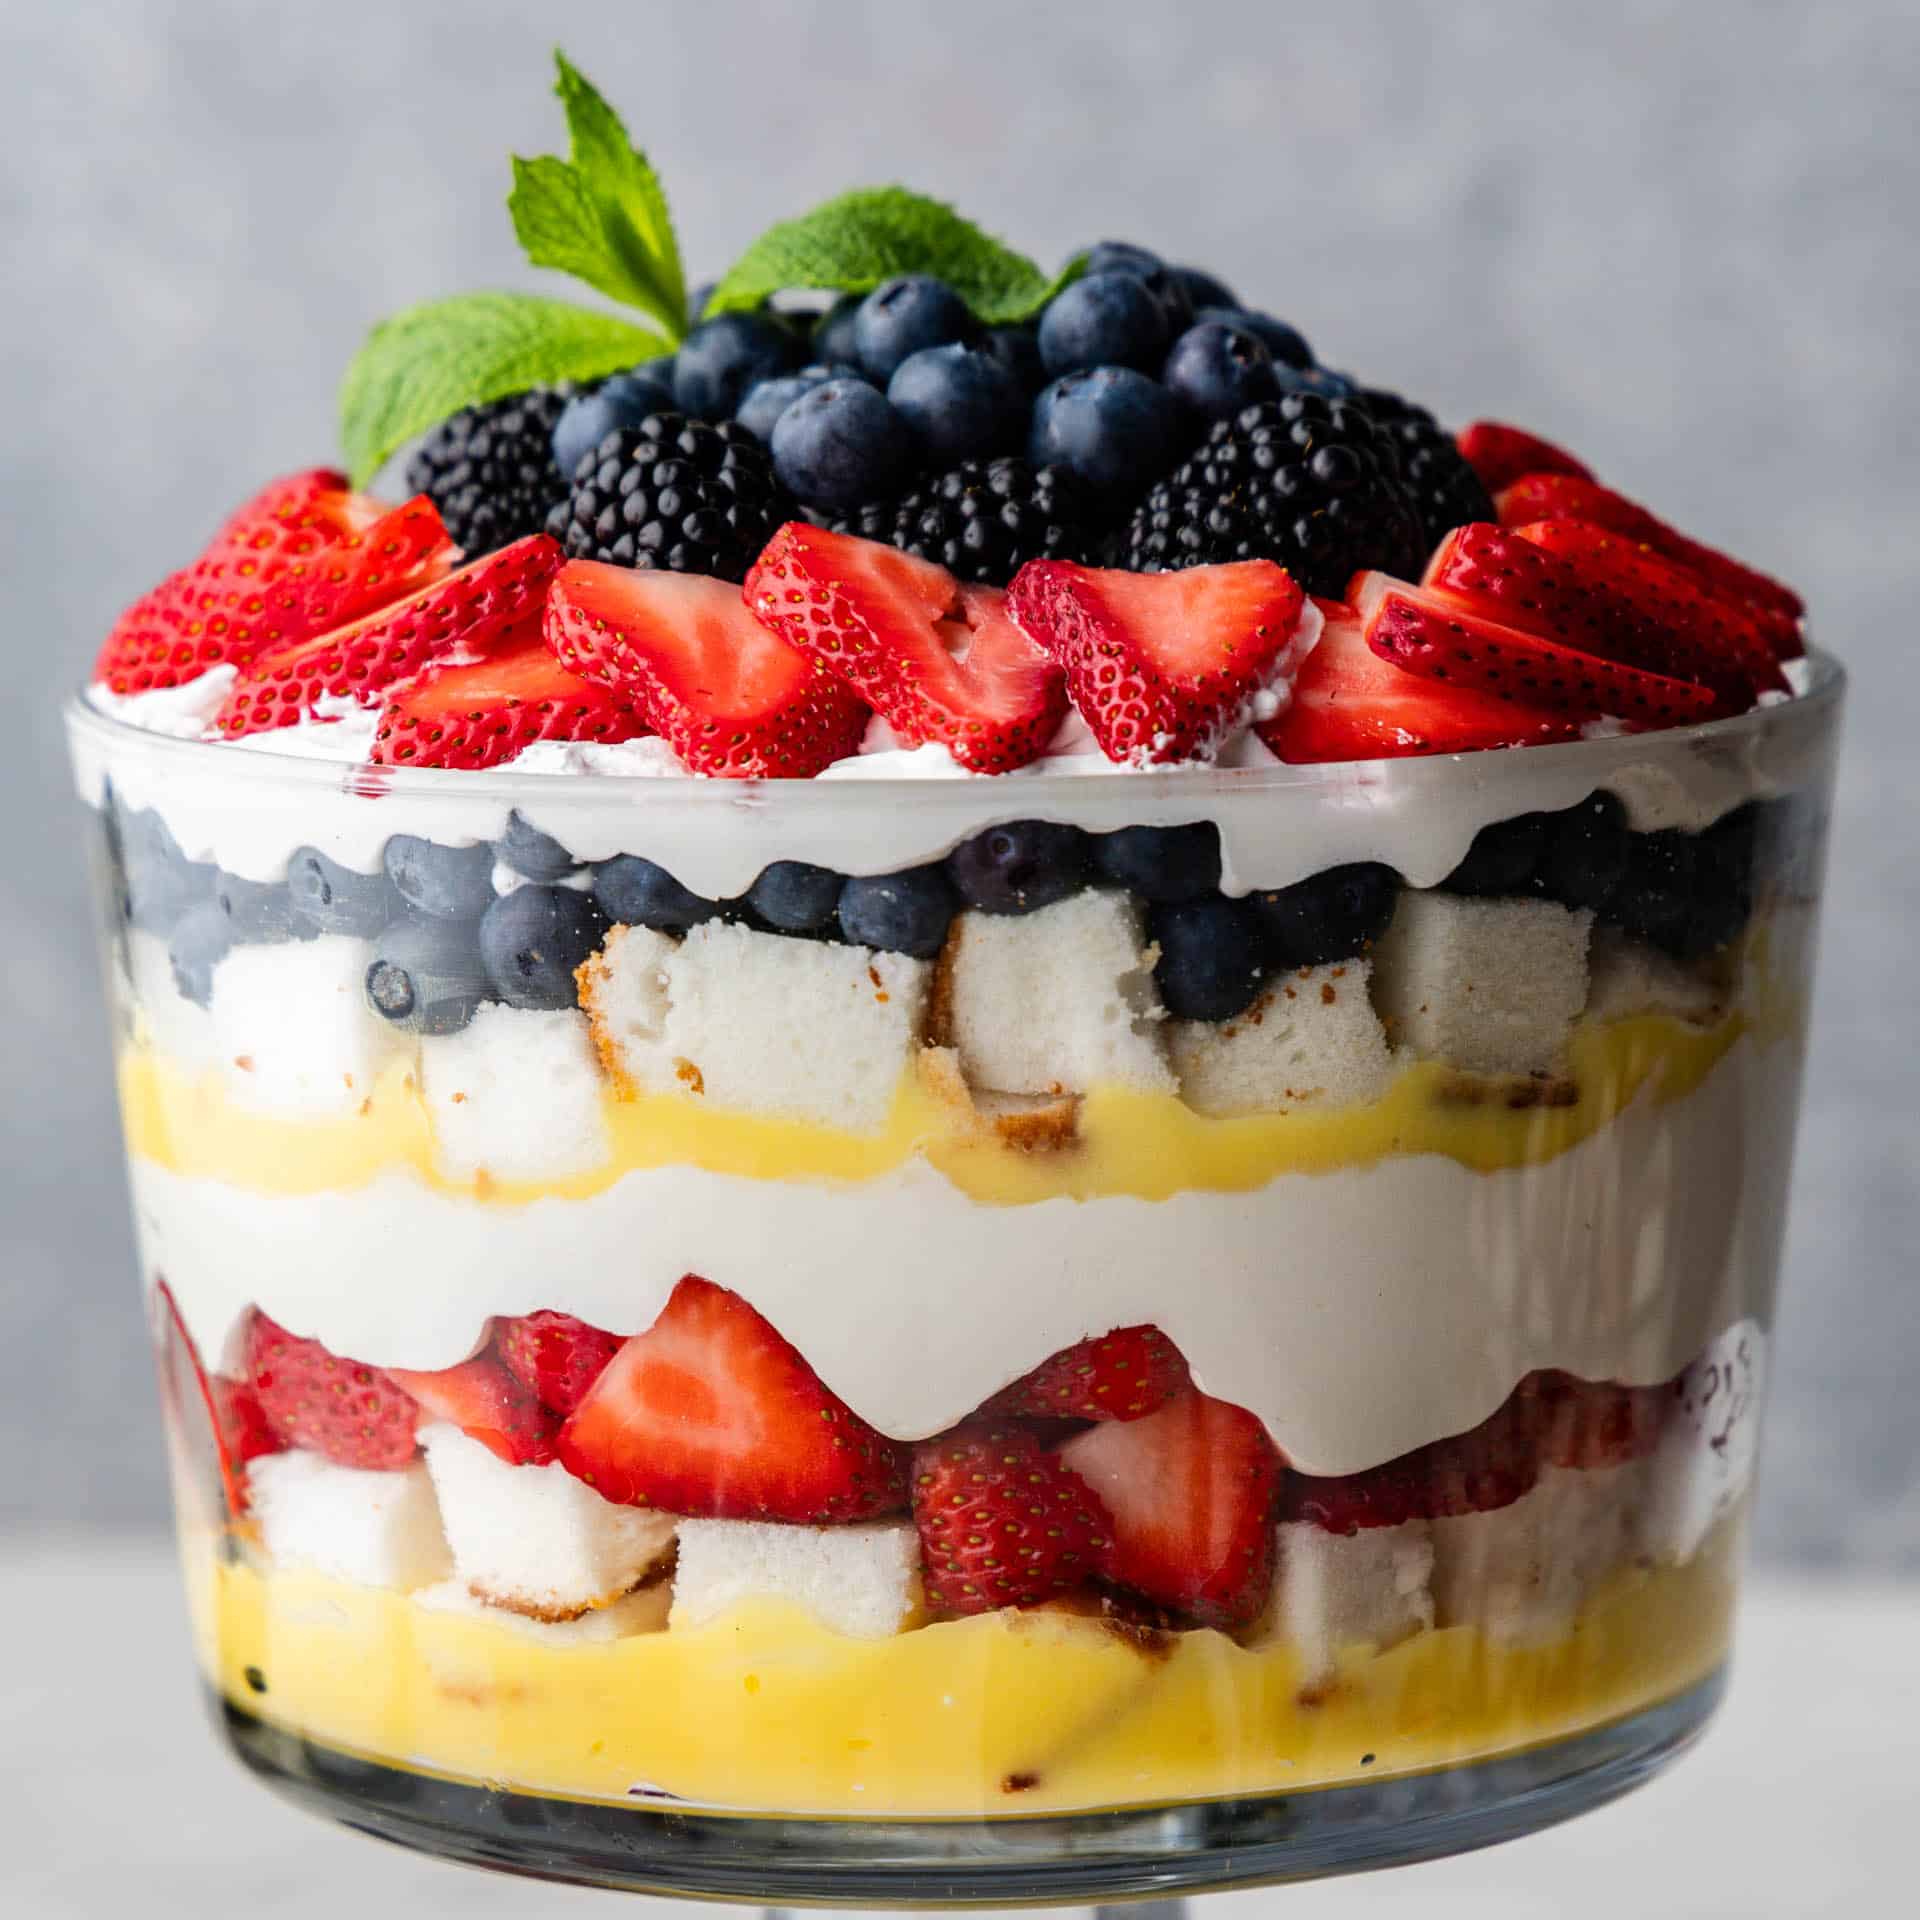 A view of the creamy berry trifle with its colorful layers of fruit and cream.